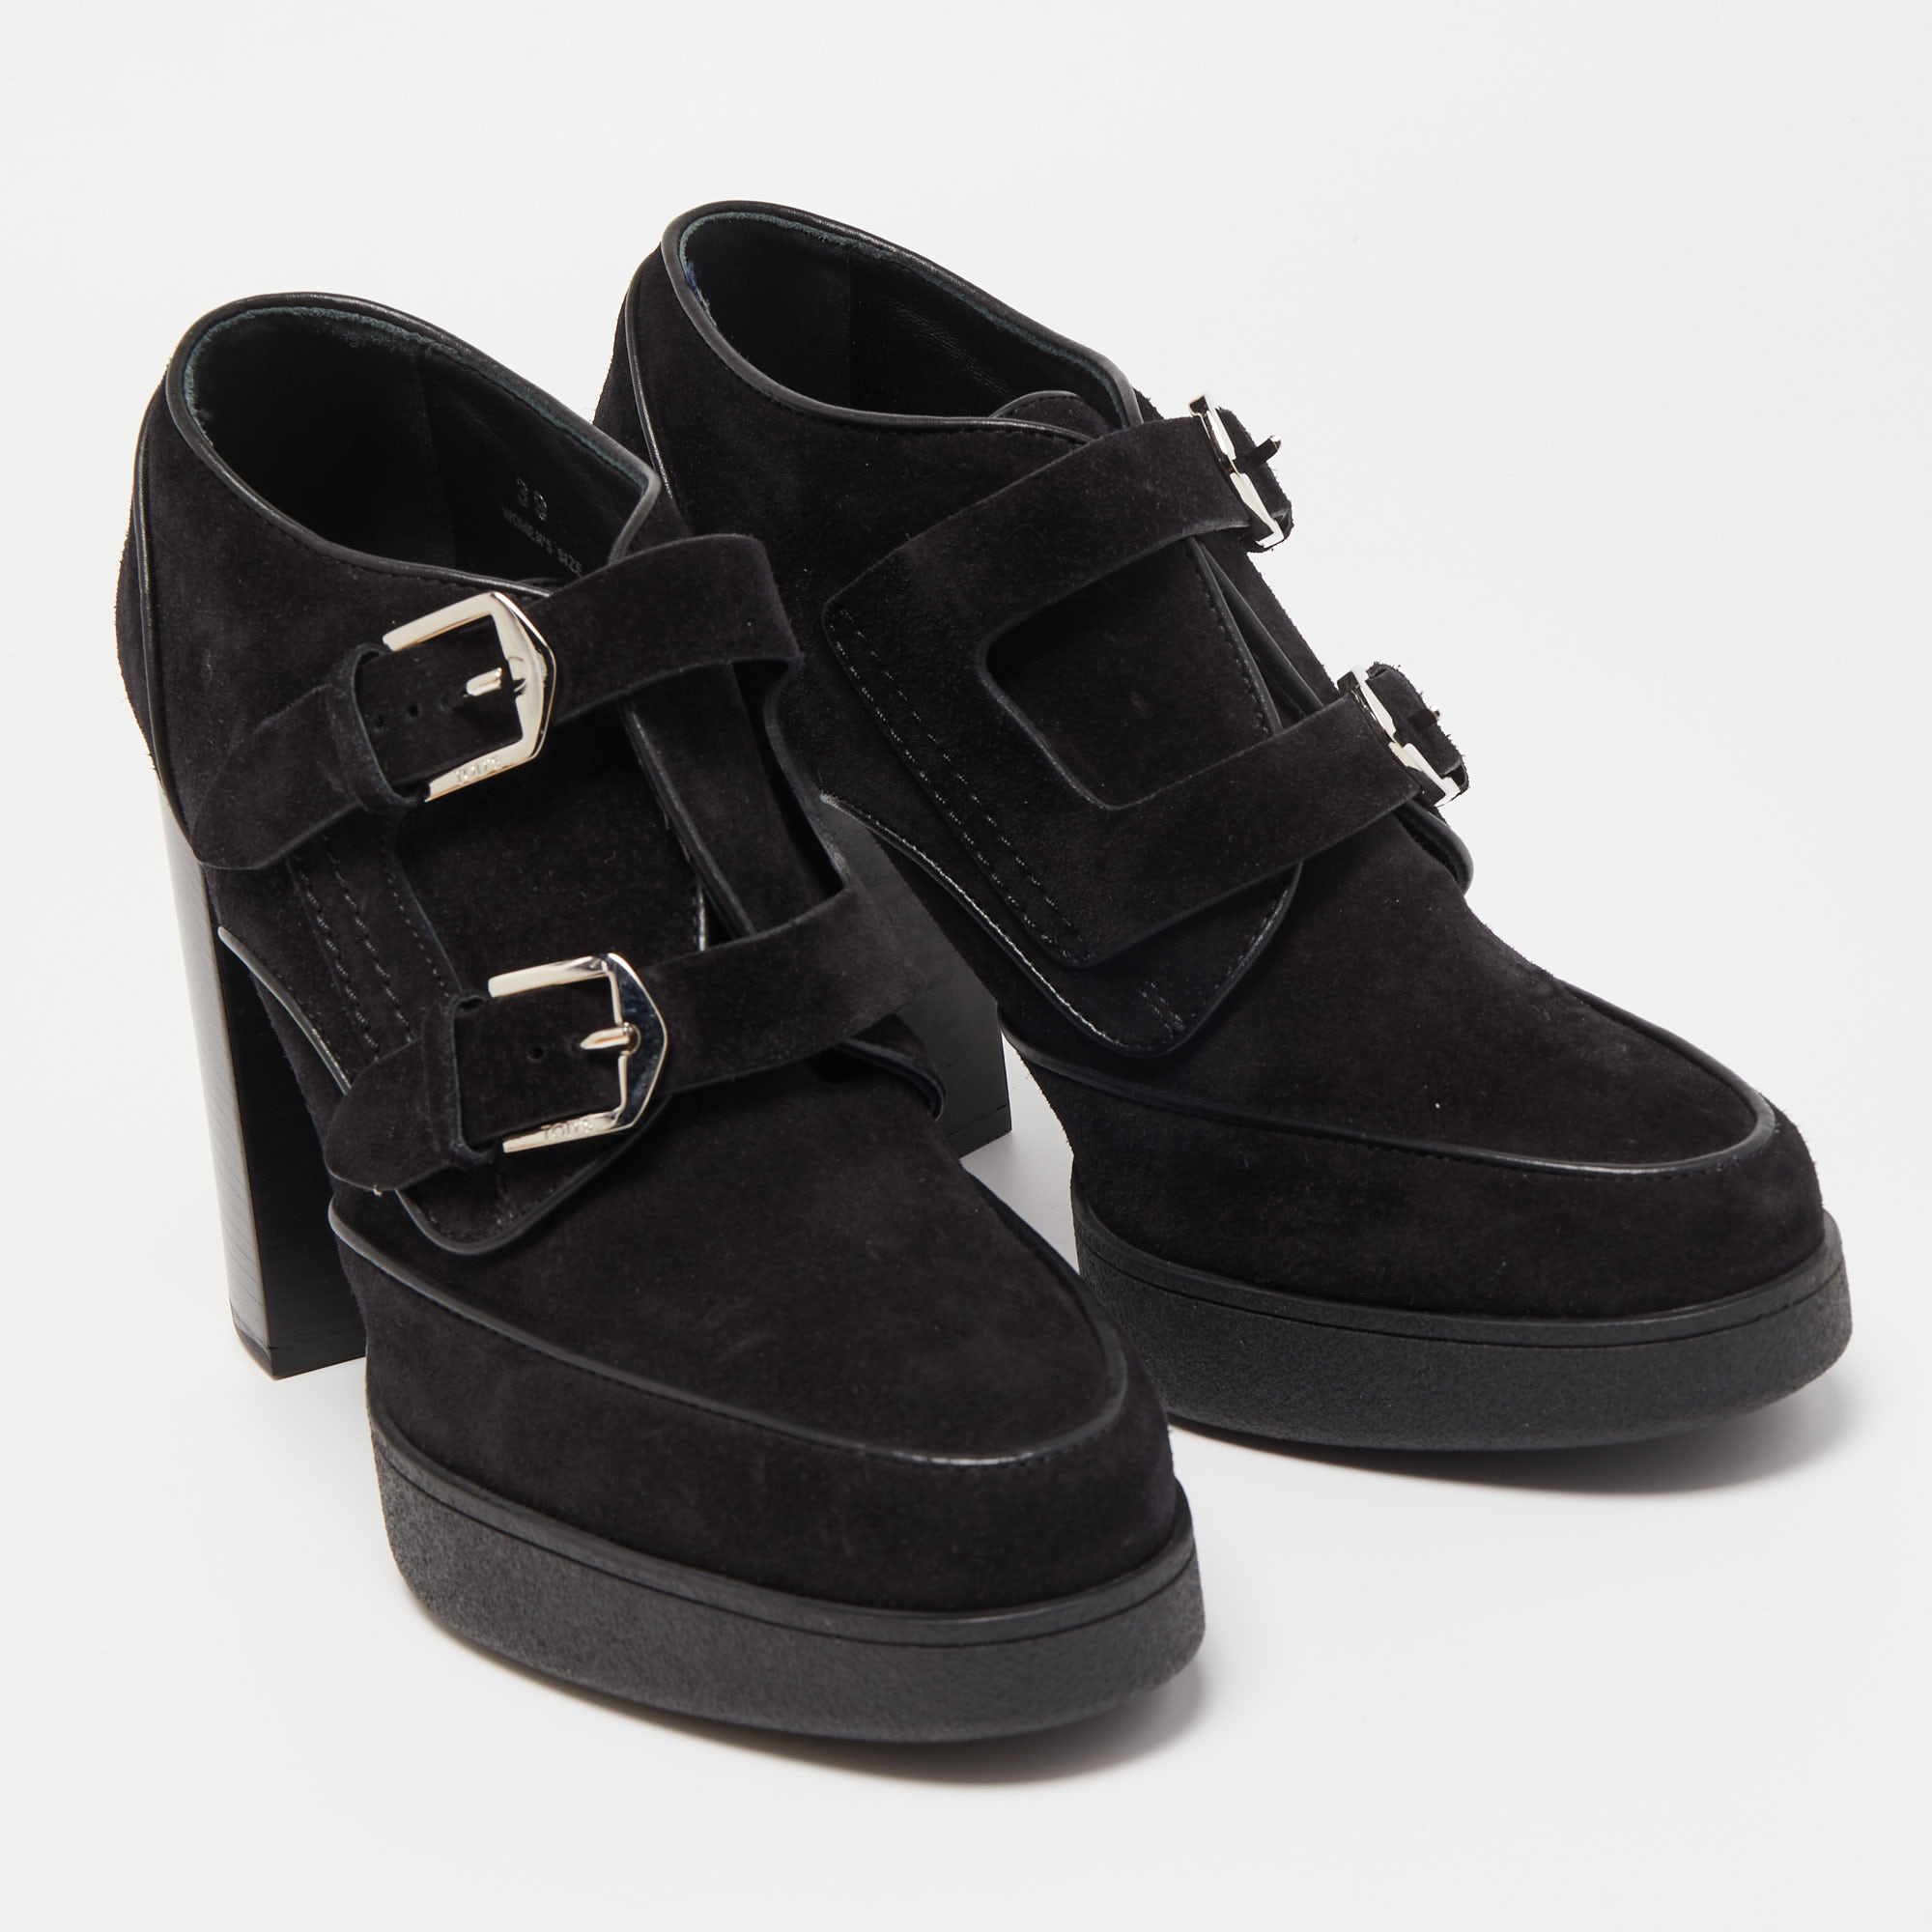 Tod's Black Suede Buckle Details Ankle Booties Size 39